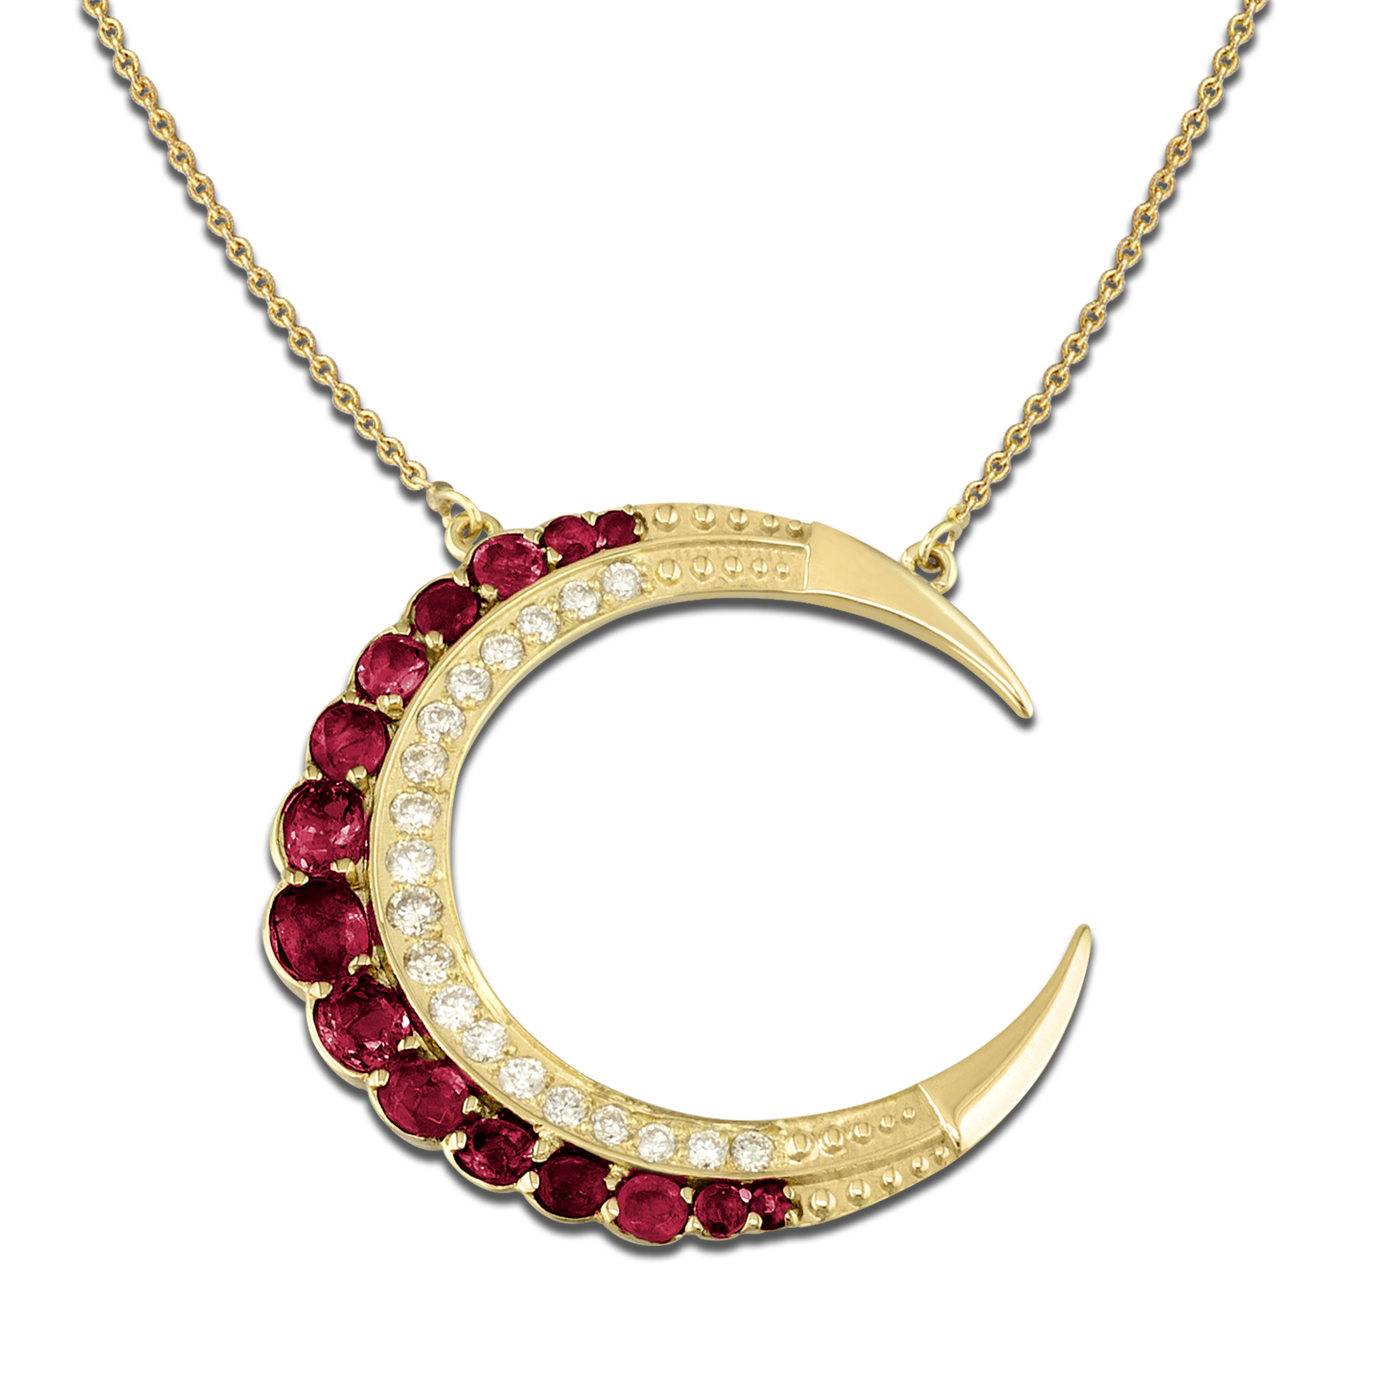 gold moon pendant with diamonds and rubies